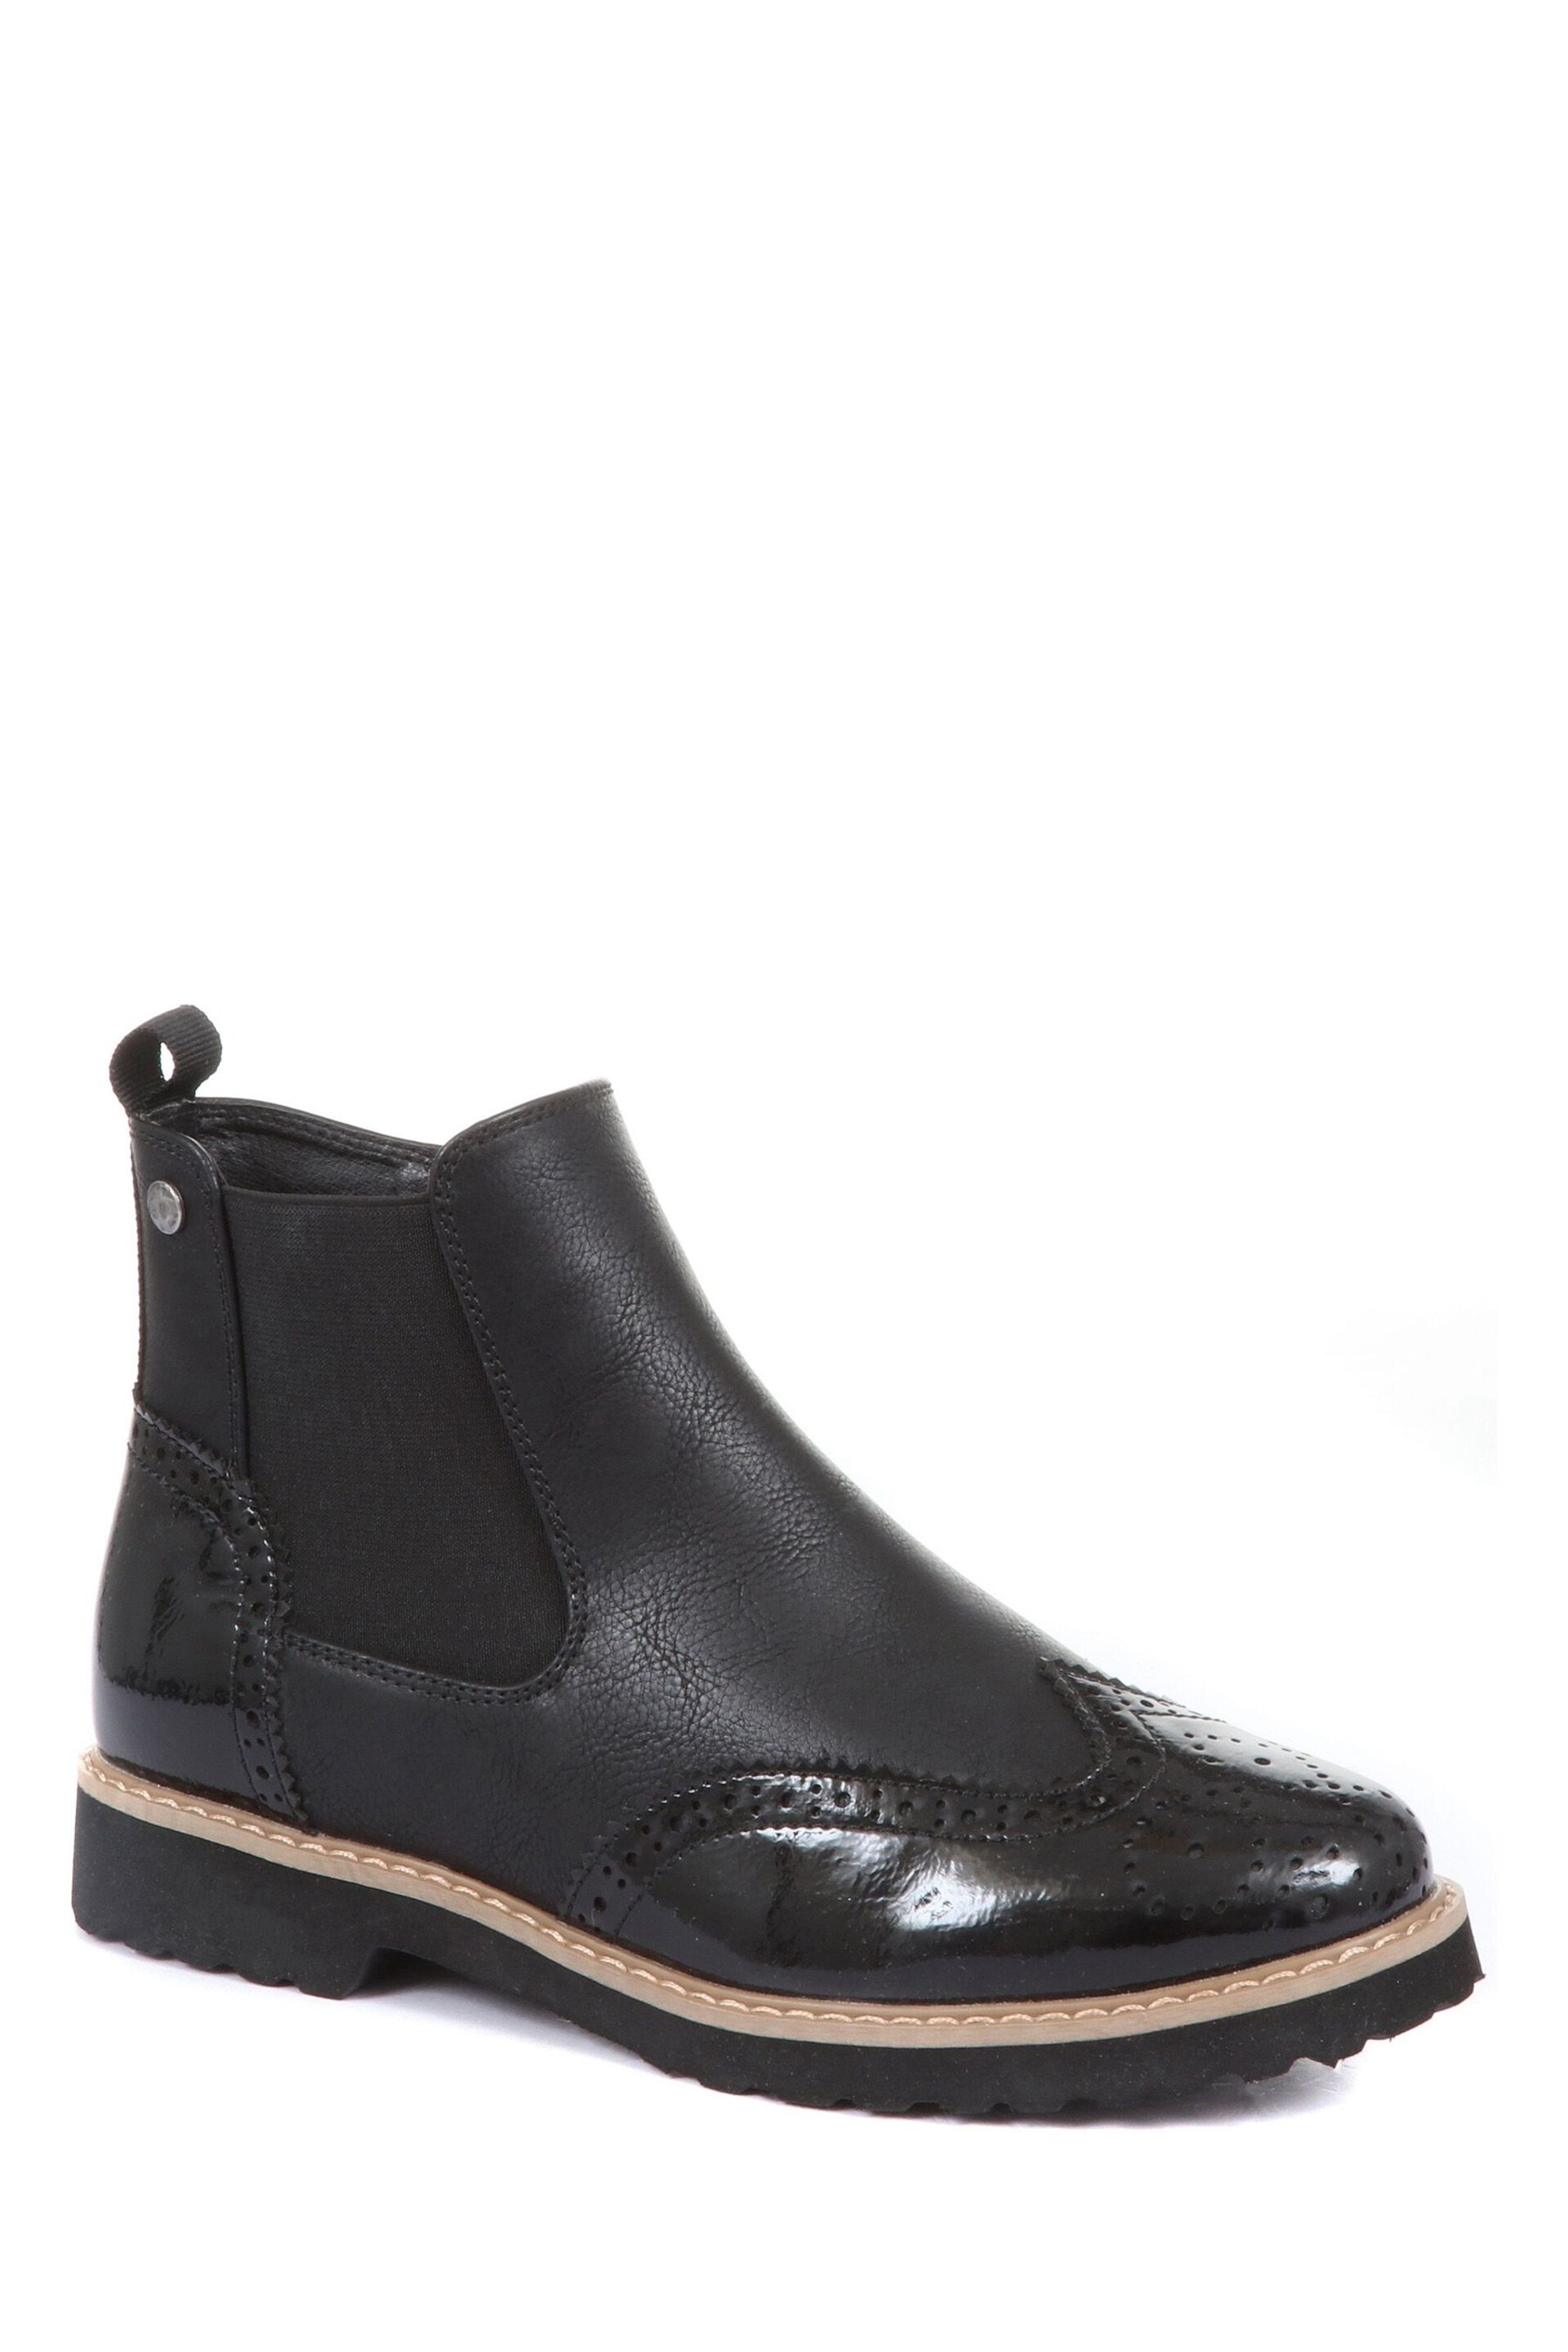 Pavers Ladies Brogue Chelsea Boots - Image 3 of 5